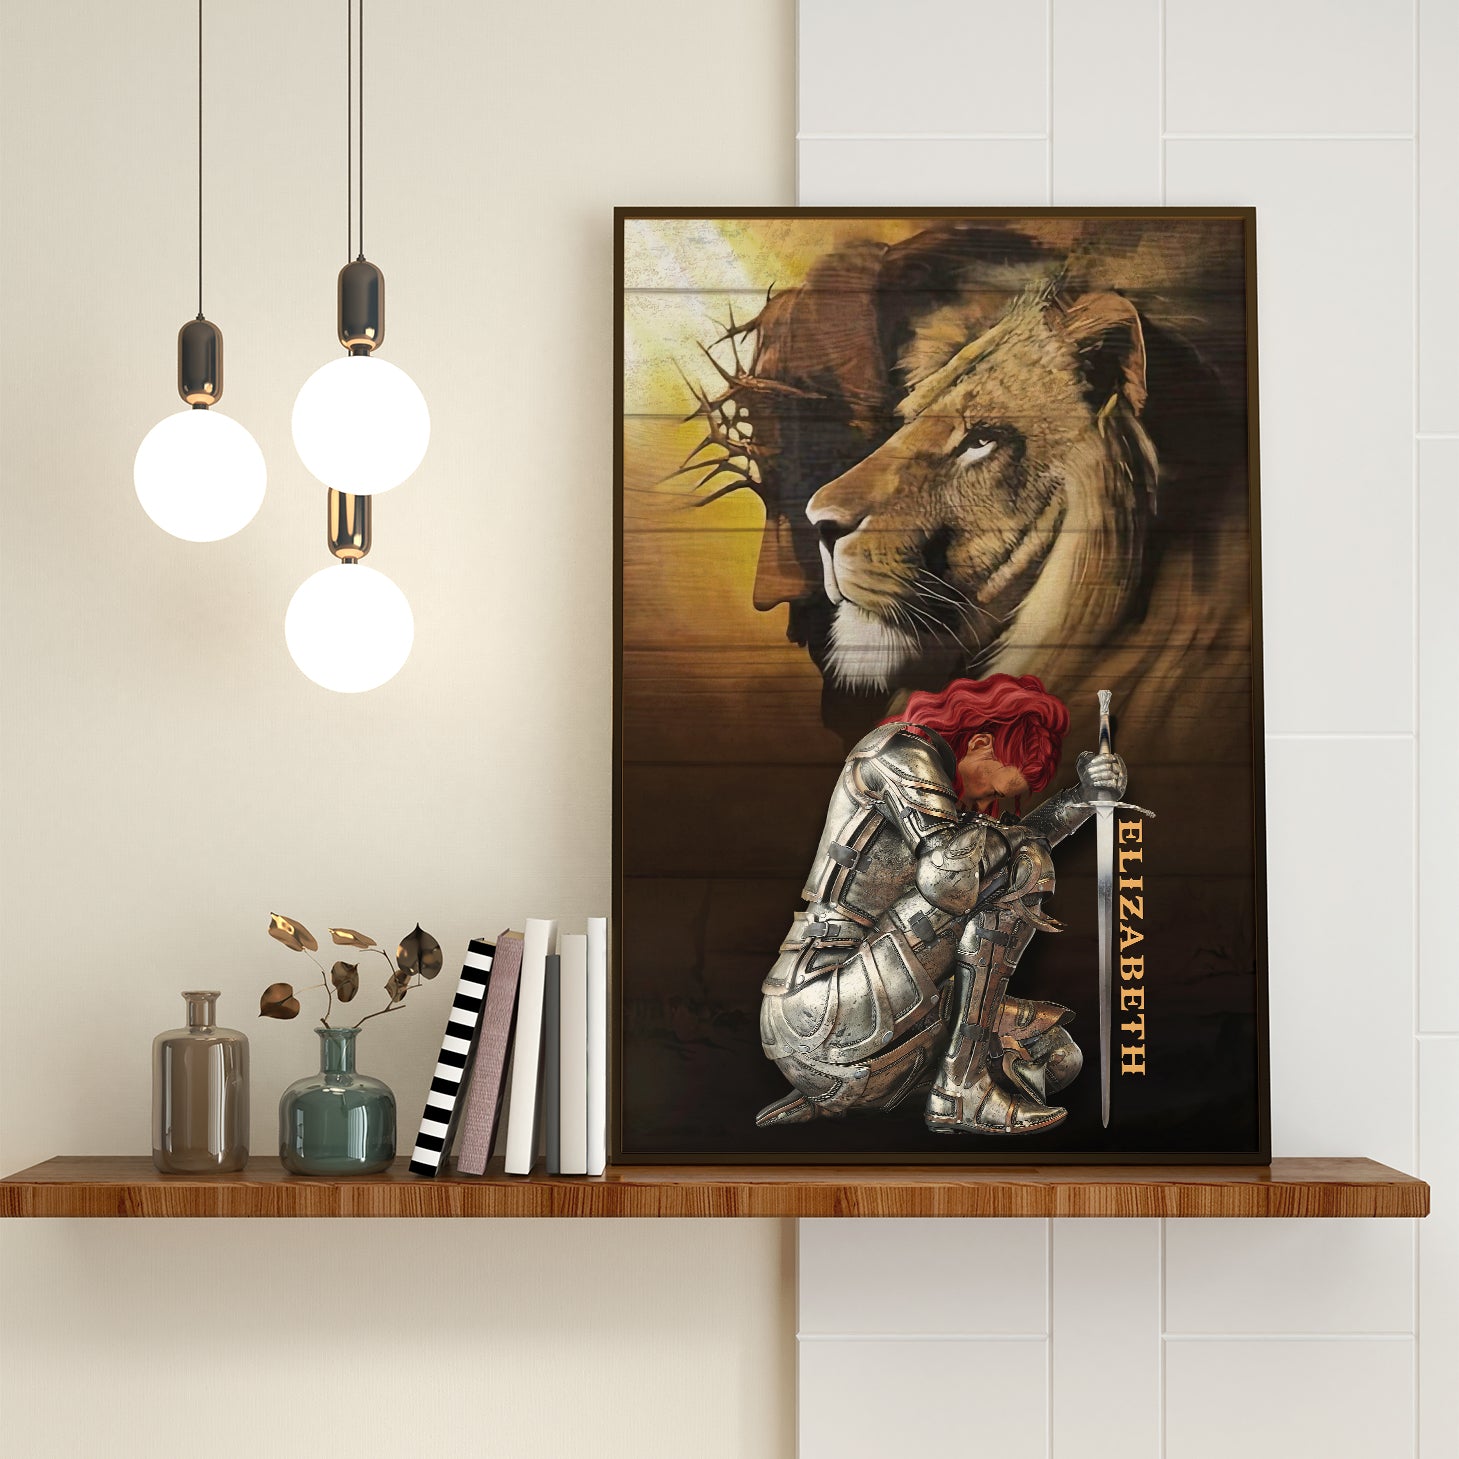 Personalized Woman Warrior of God, Armor Jesus Lion Warrior Woman Poster